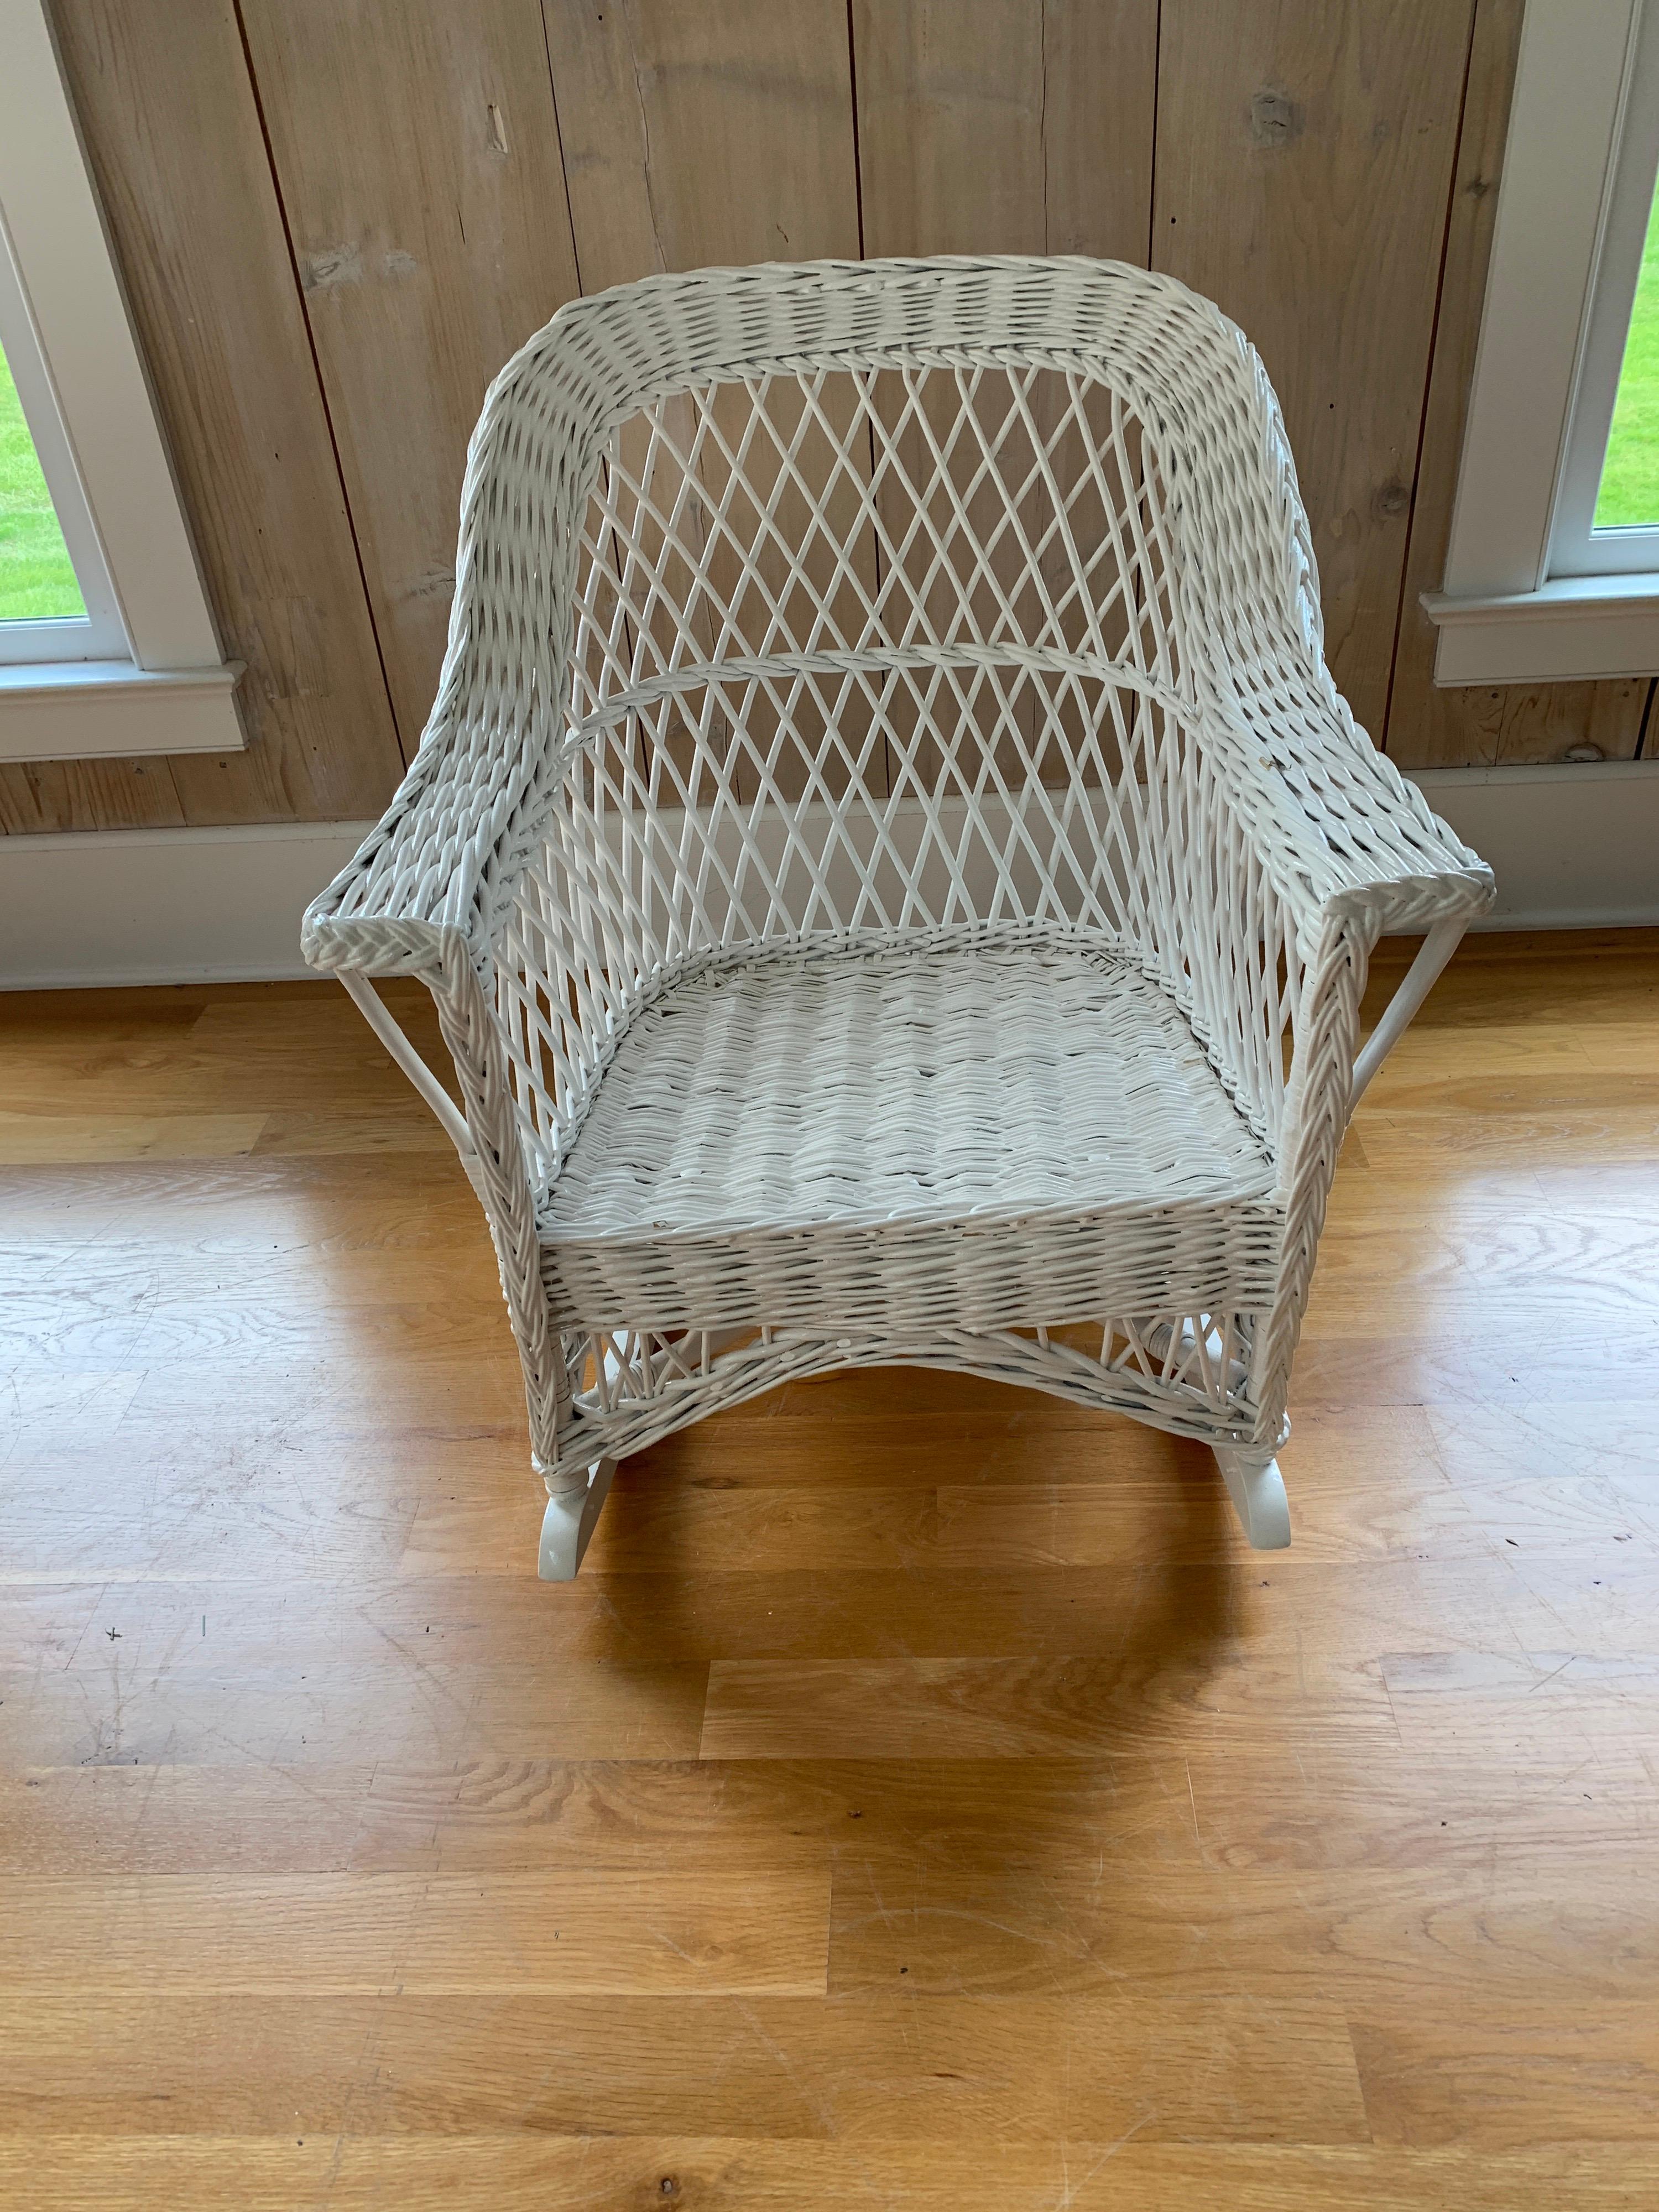 Antique Bar Harbor Wicker Rocker In Good Condition For Sale In Old Saybrook, CT